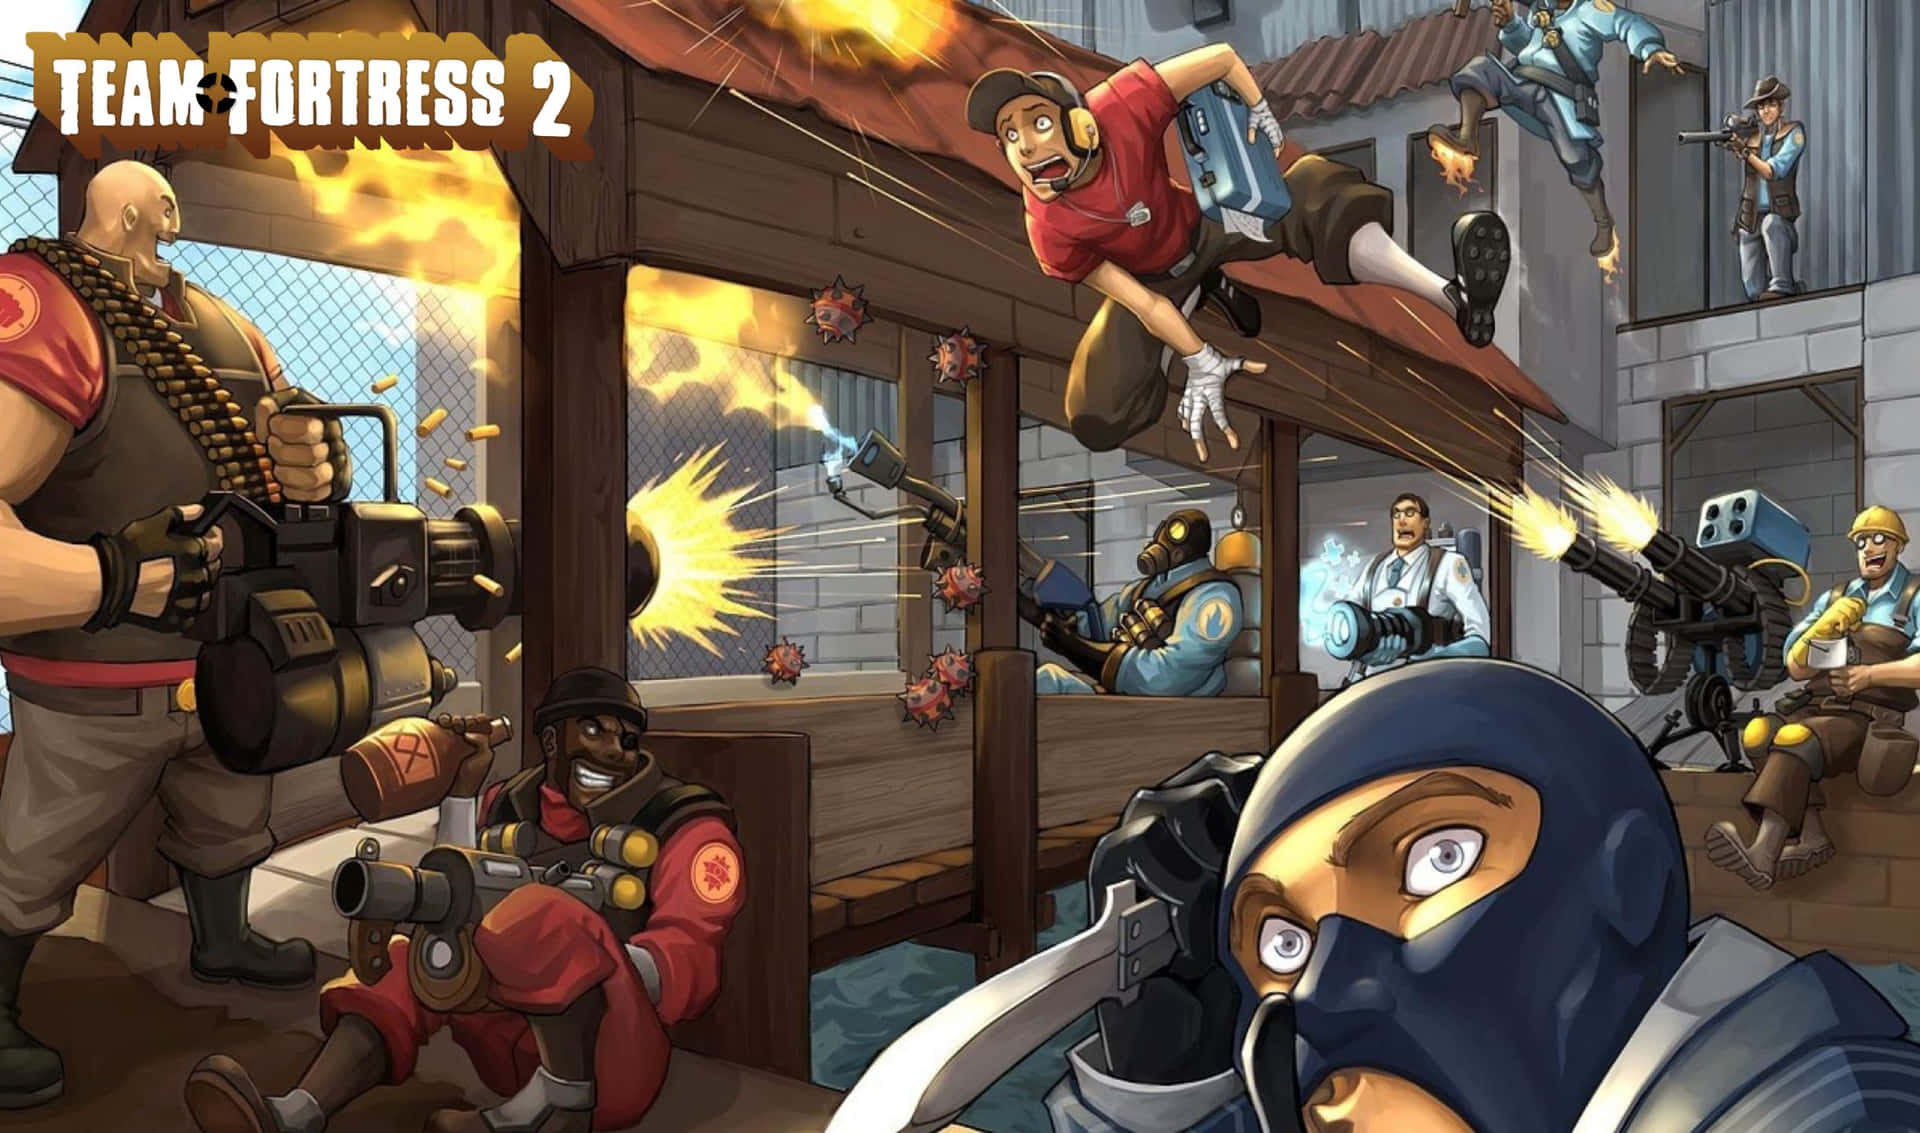 Enjoy the Fun World of Team Fortress 2 with this 2440x1440 Wallpaper